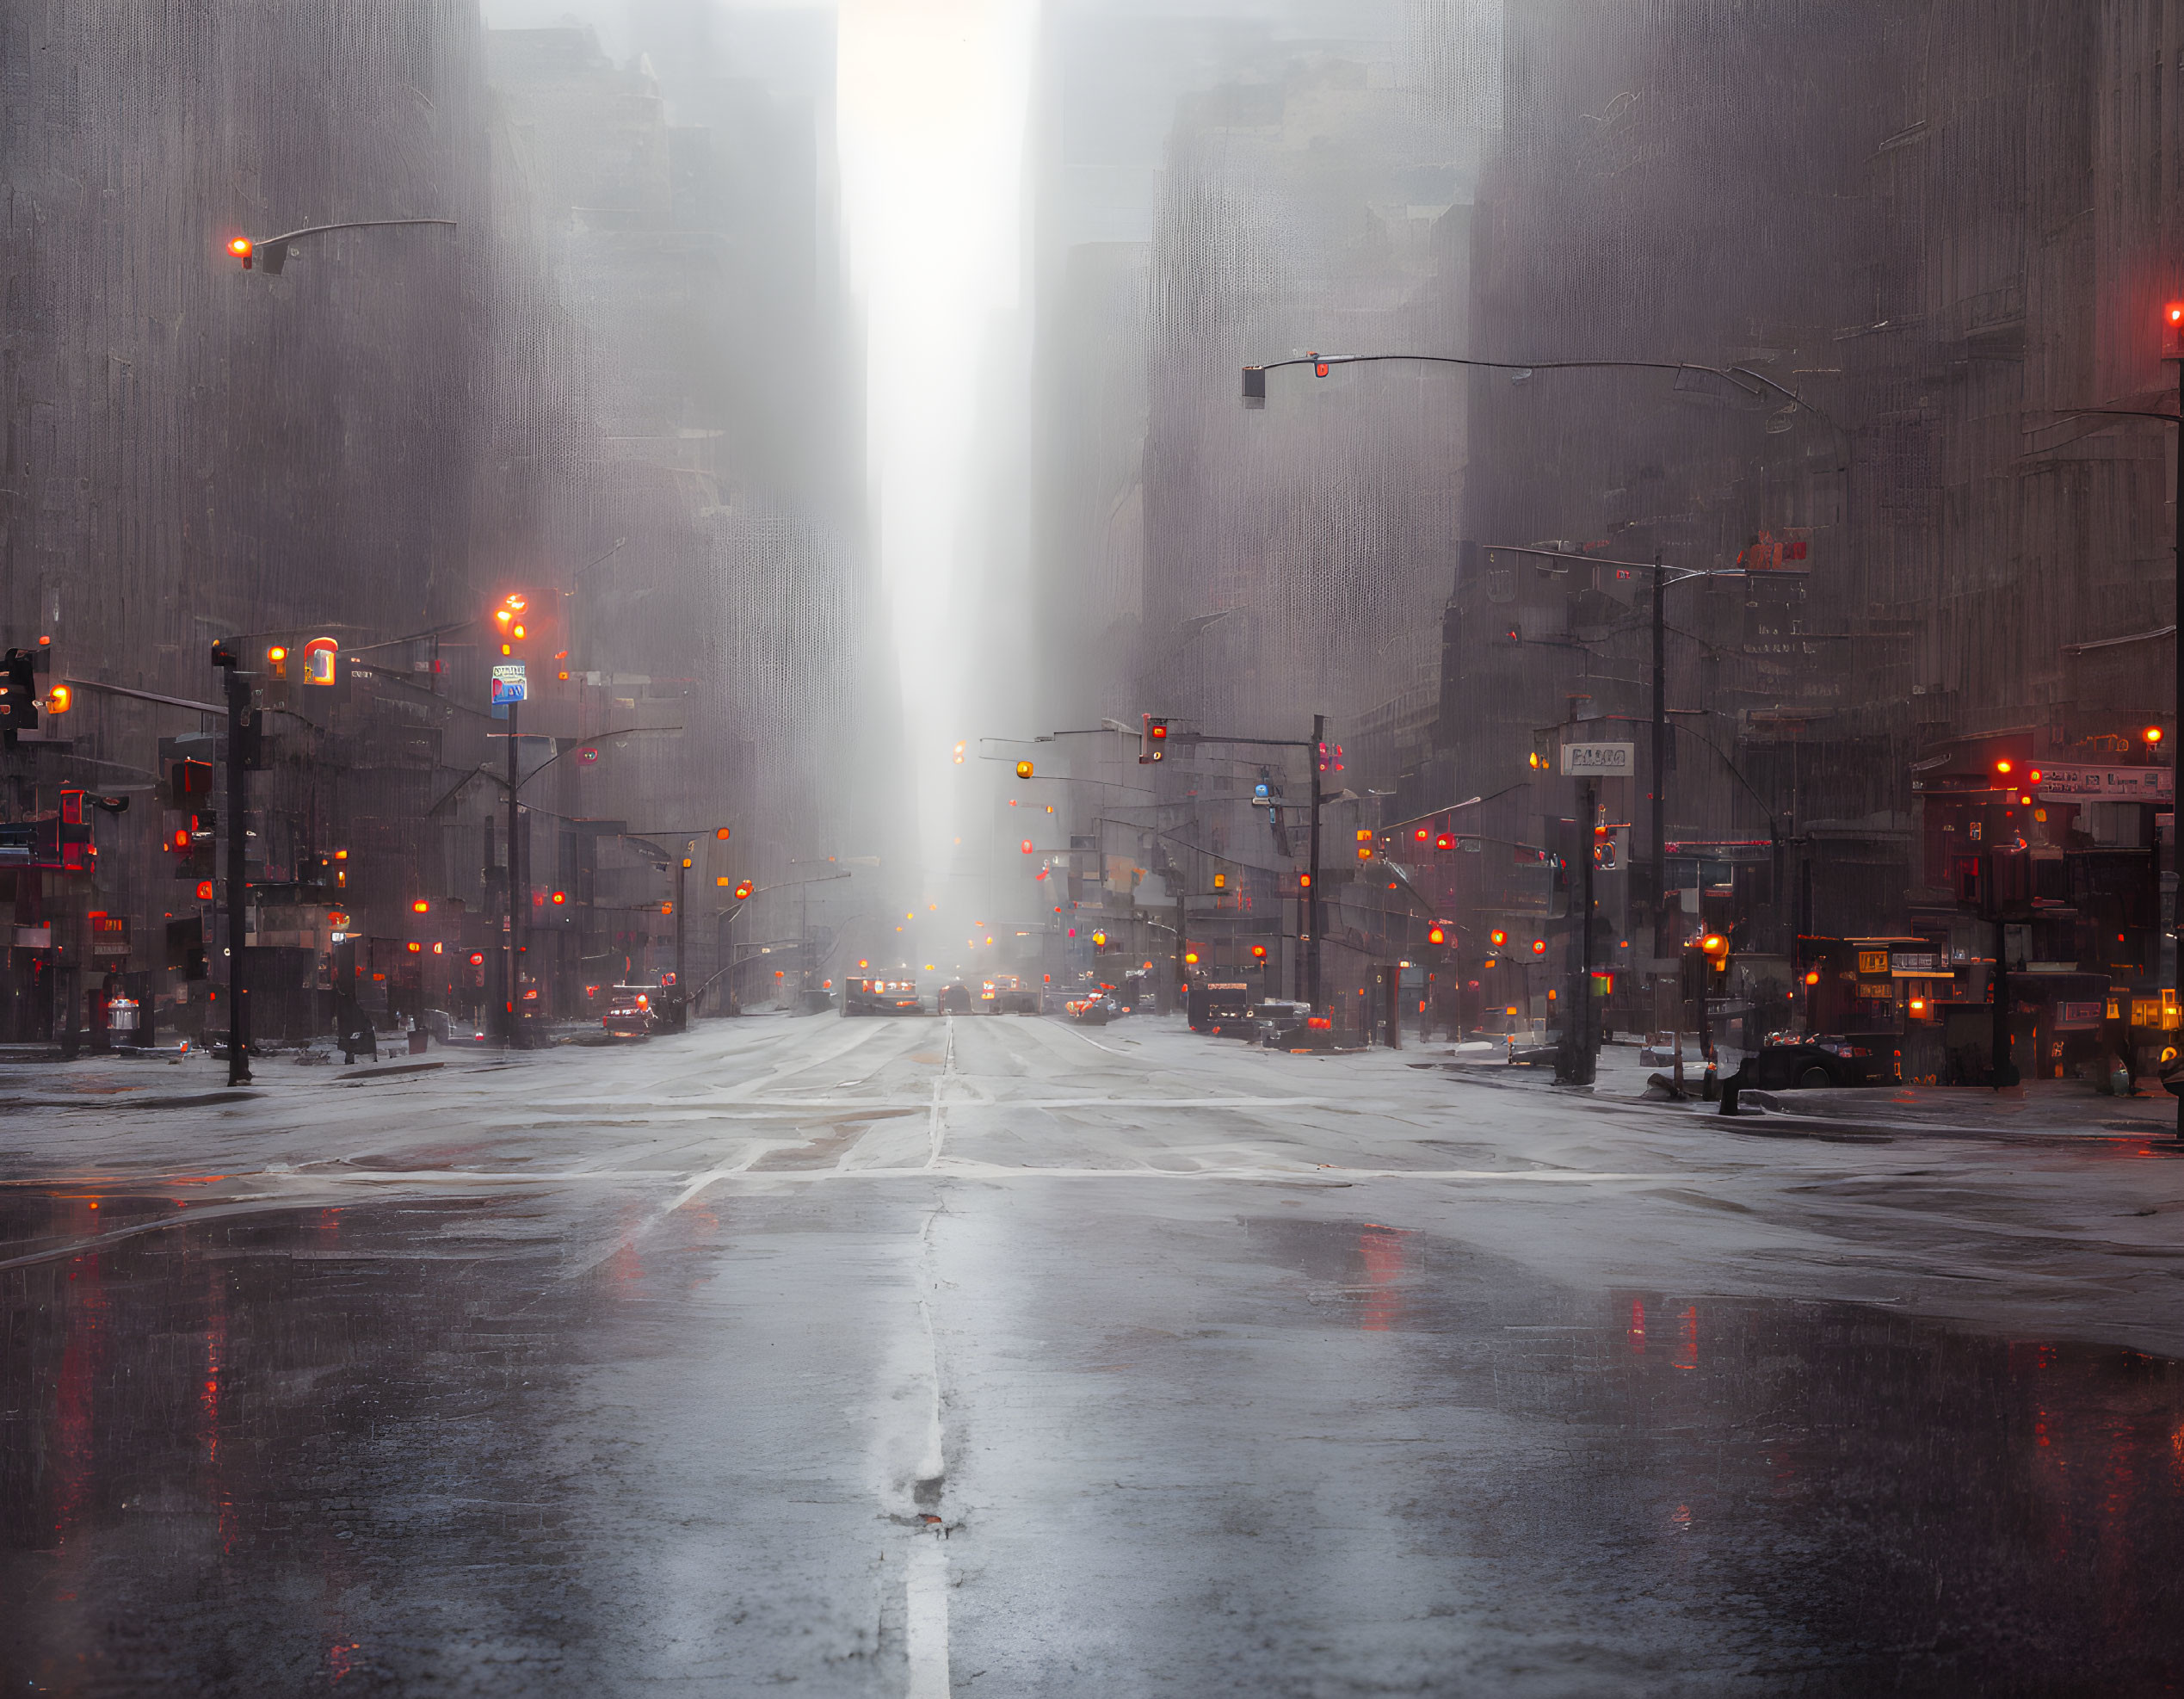 City street in rain with traffic lights and vehicles, surrounded by tall buildings and dramatic light beam